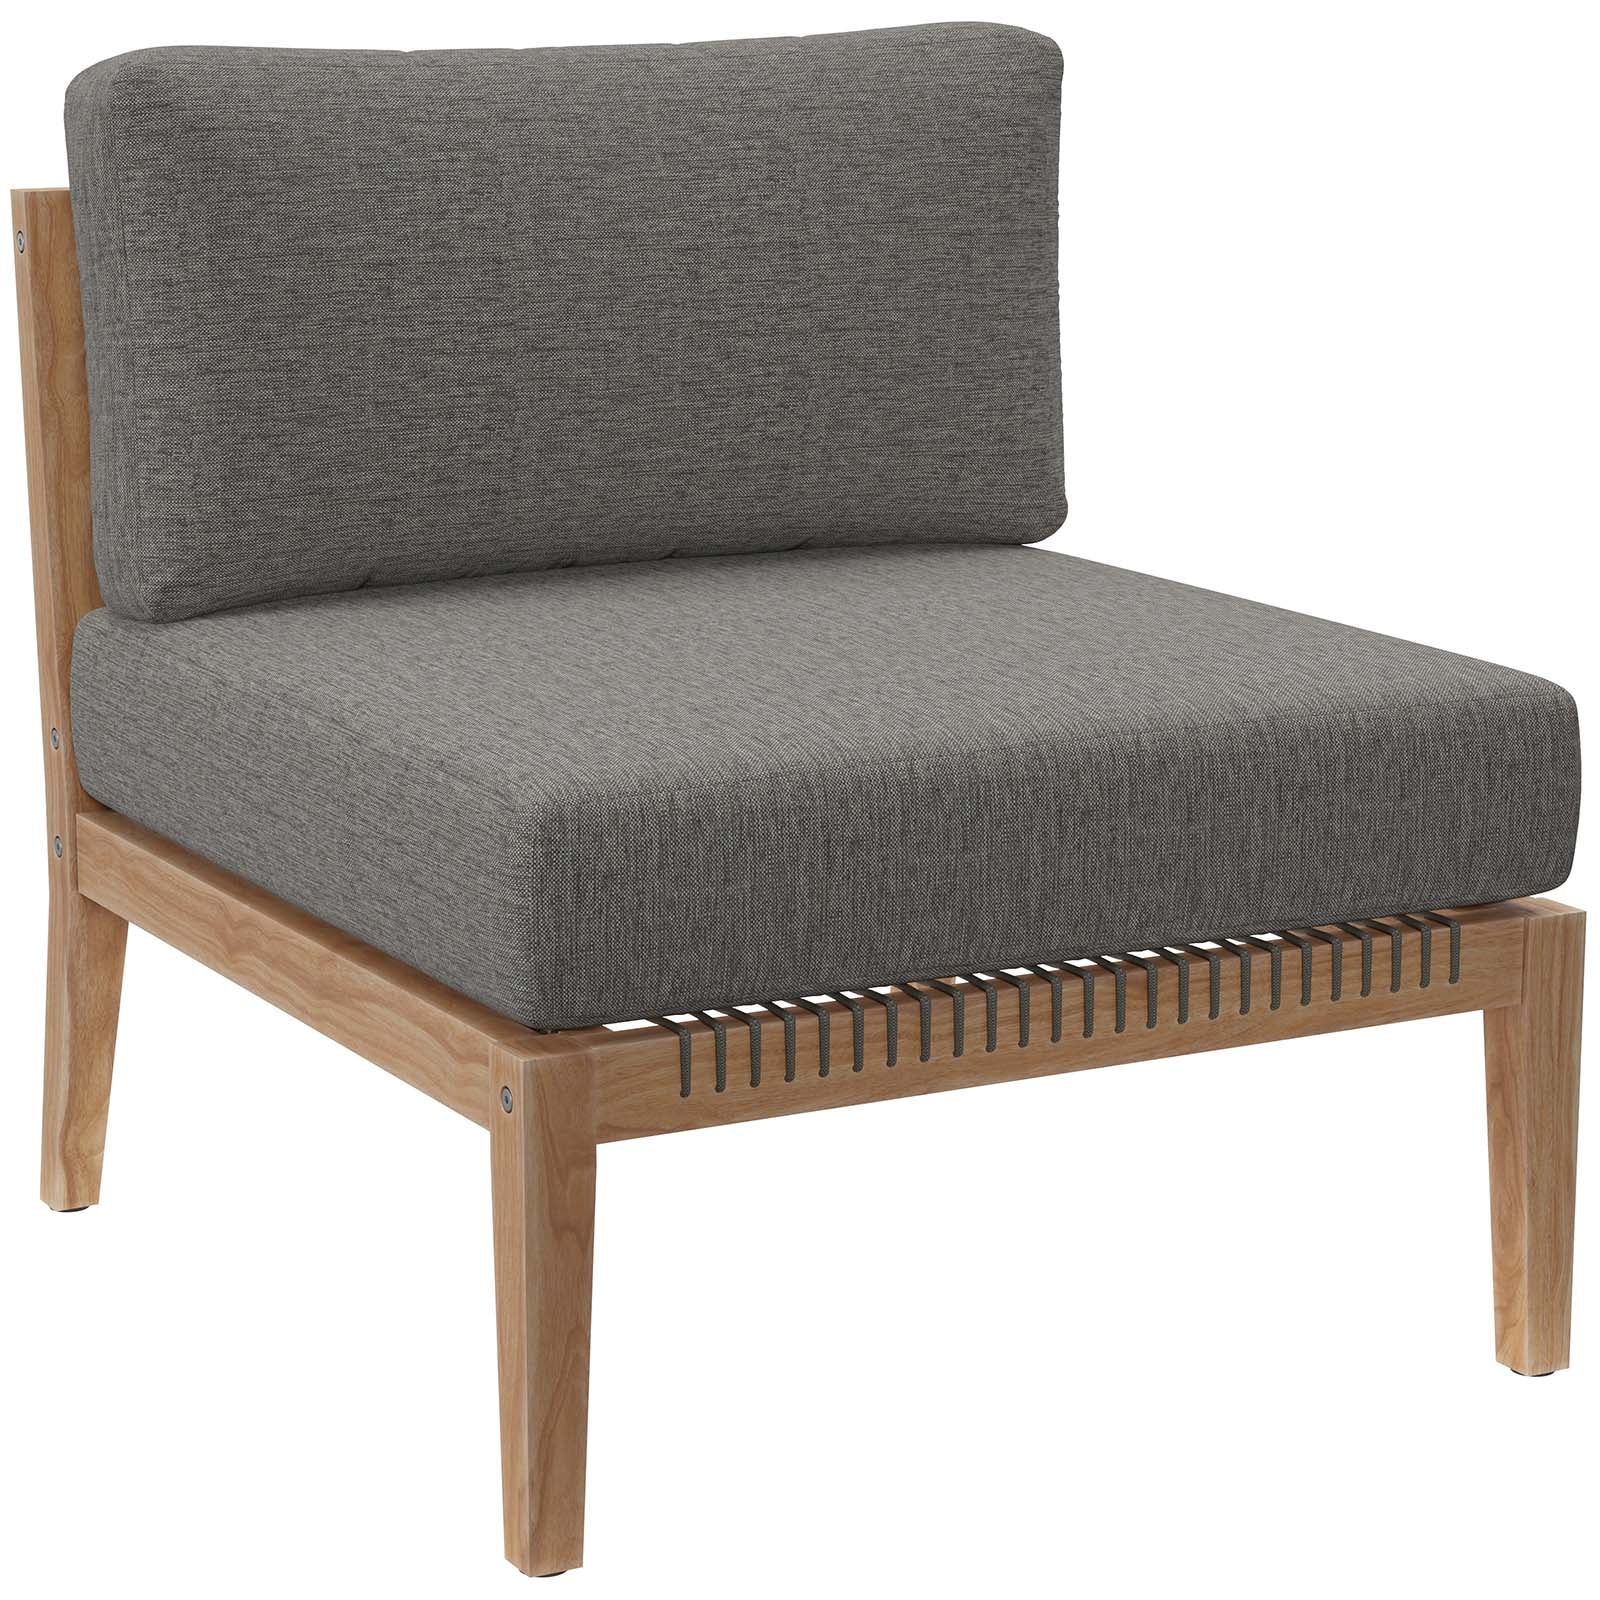 Modway Outdoor Sofas - Clearwater-Outdoor-Patio-Teak-Wood-Armless-Chair-Gray-Graphite